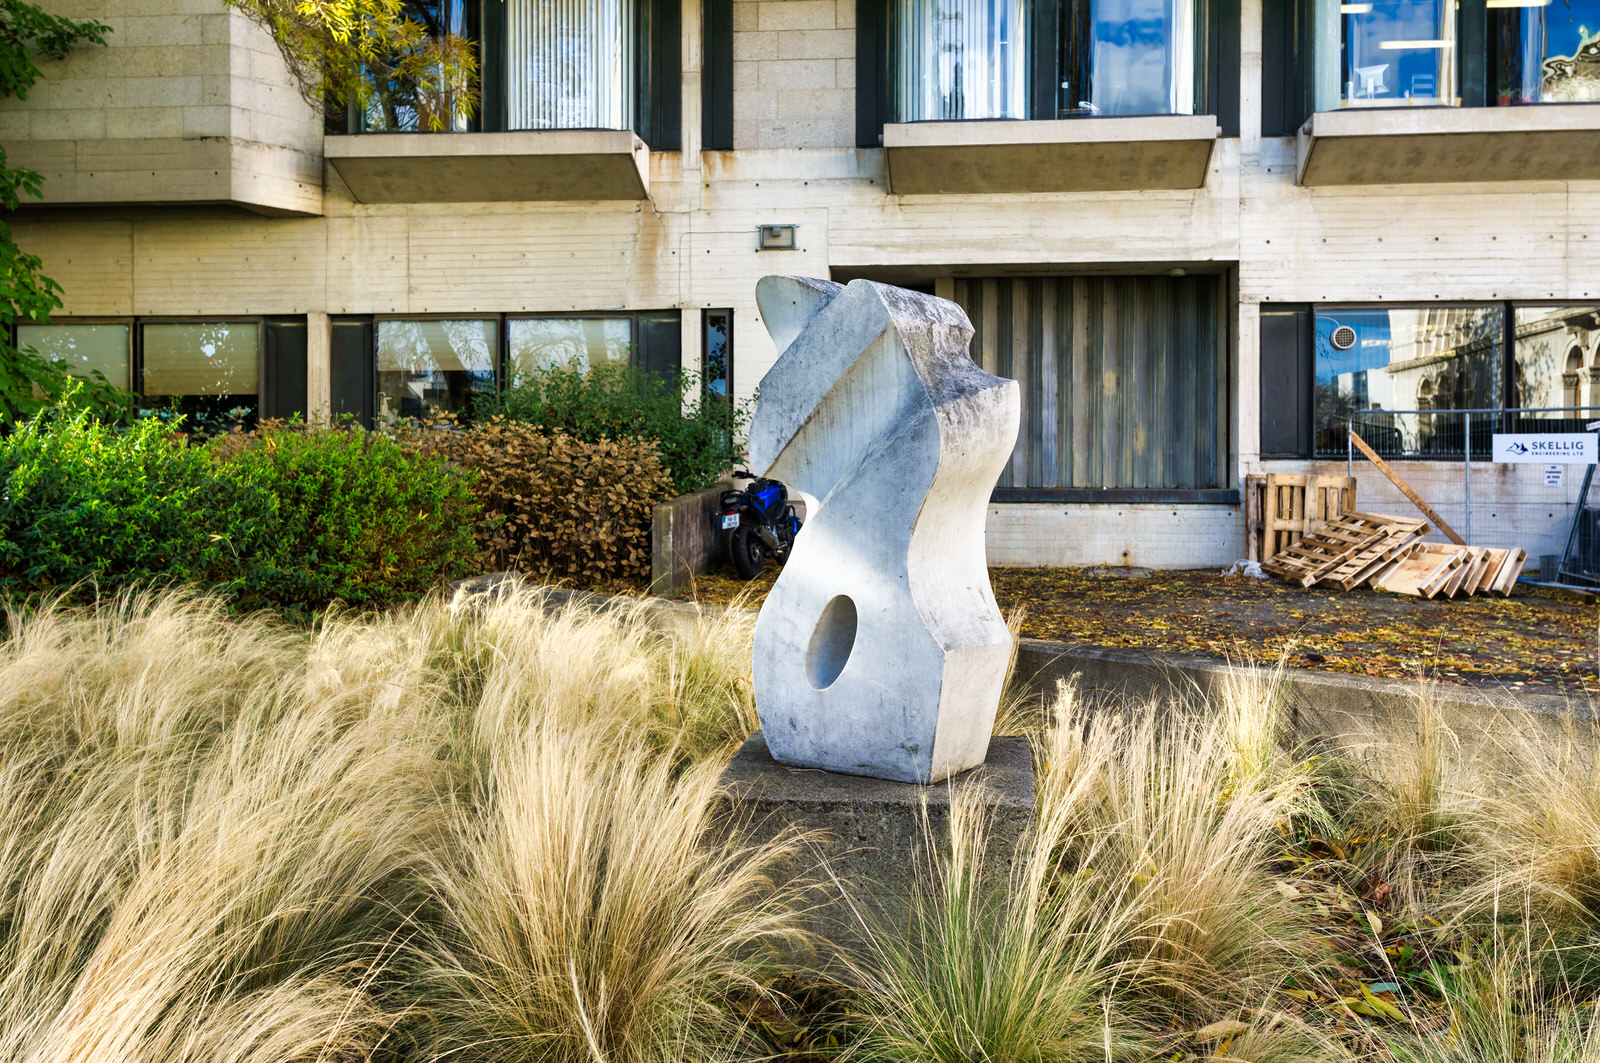 THIS SCULPTURE IS OUTSIDE THE BERKELEY LIBRARY